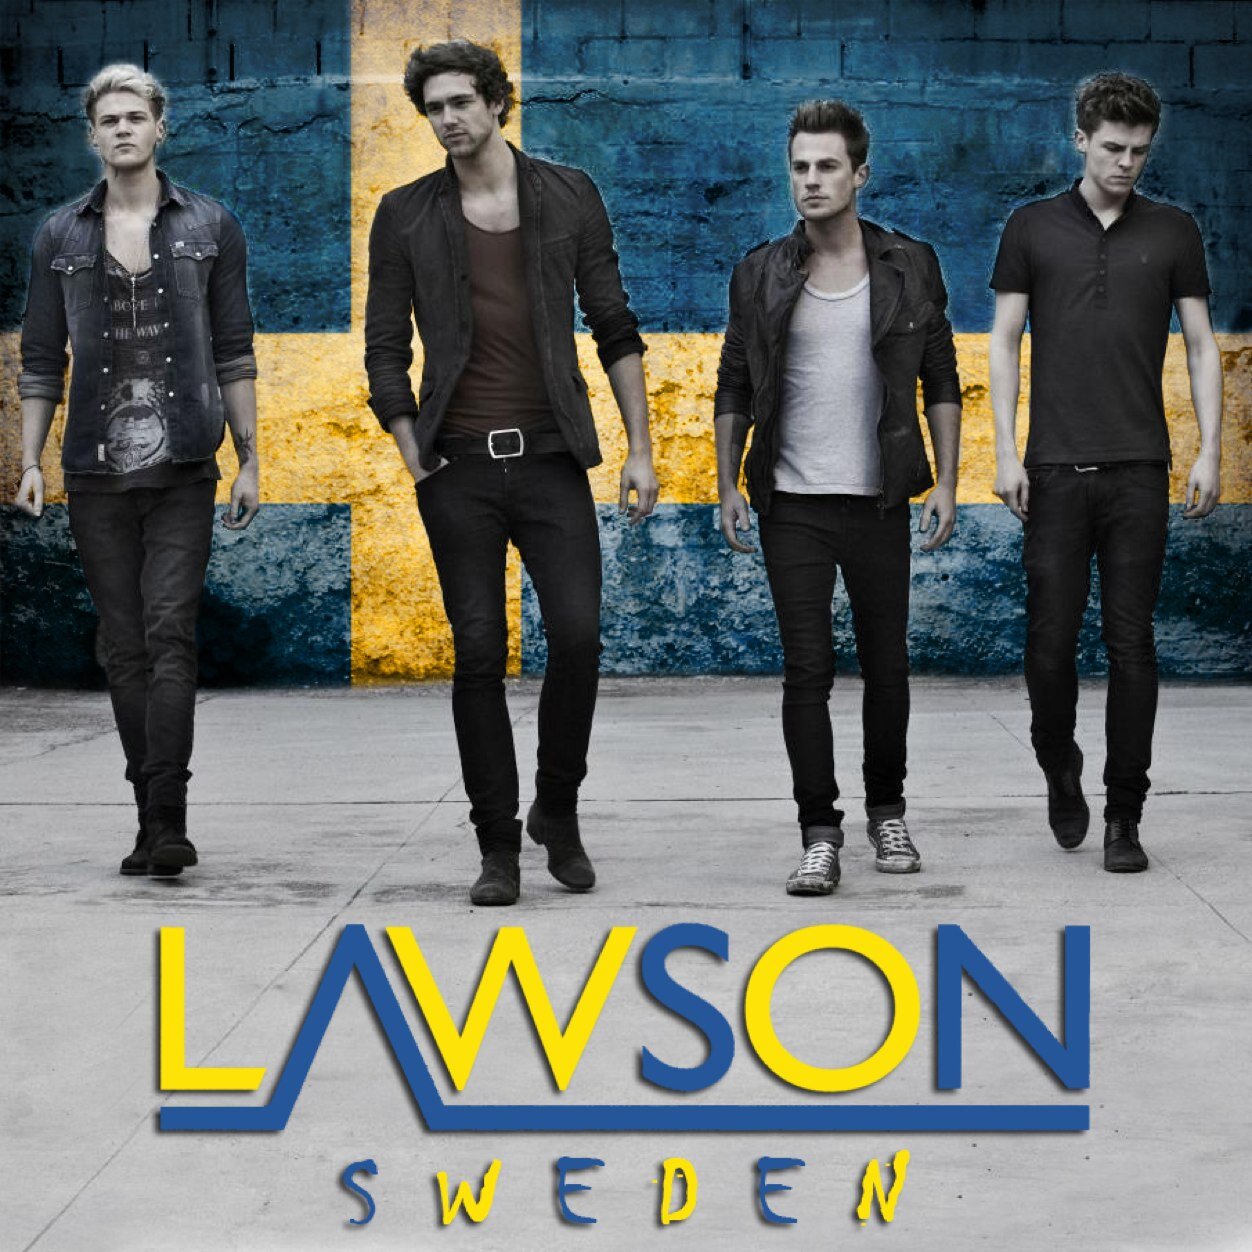 Sewdish fanpage for @LawsonOfficial